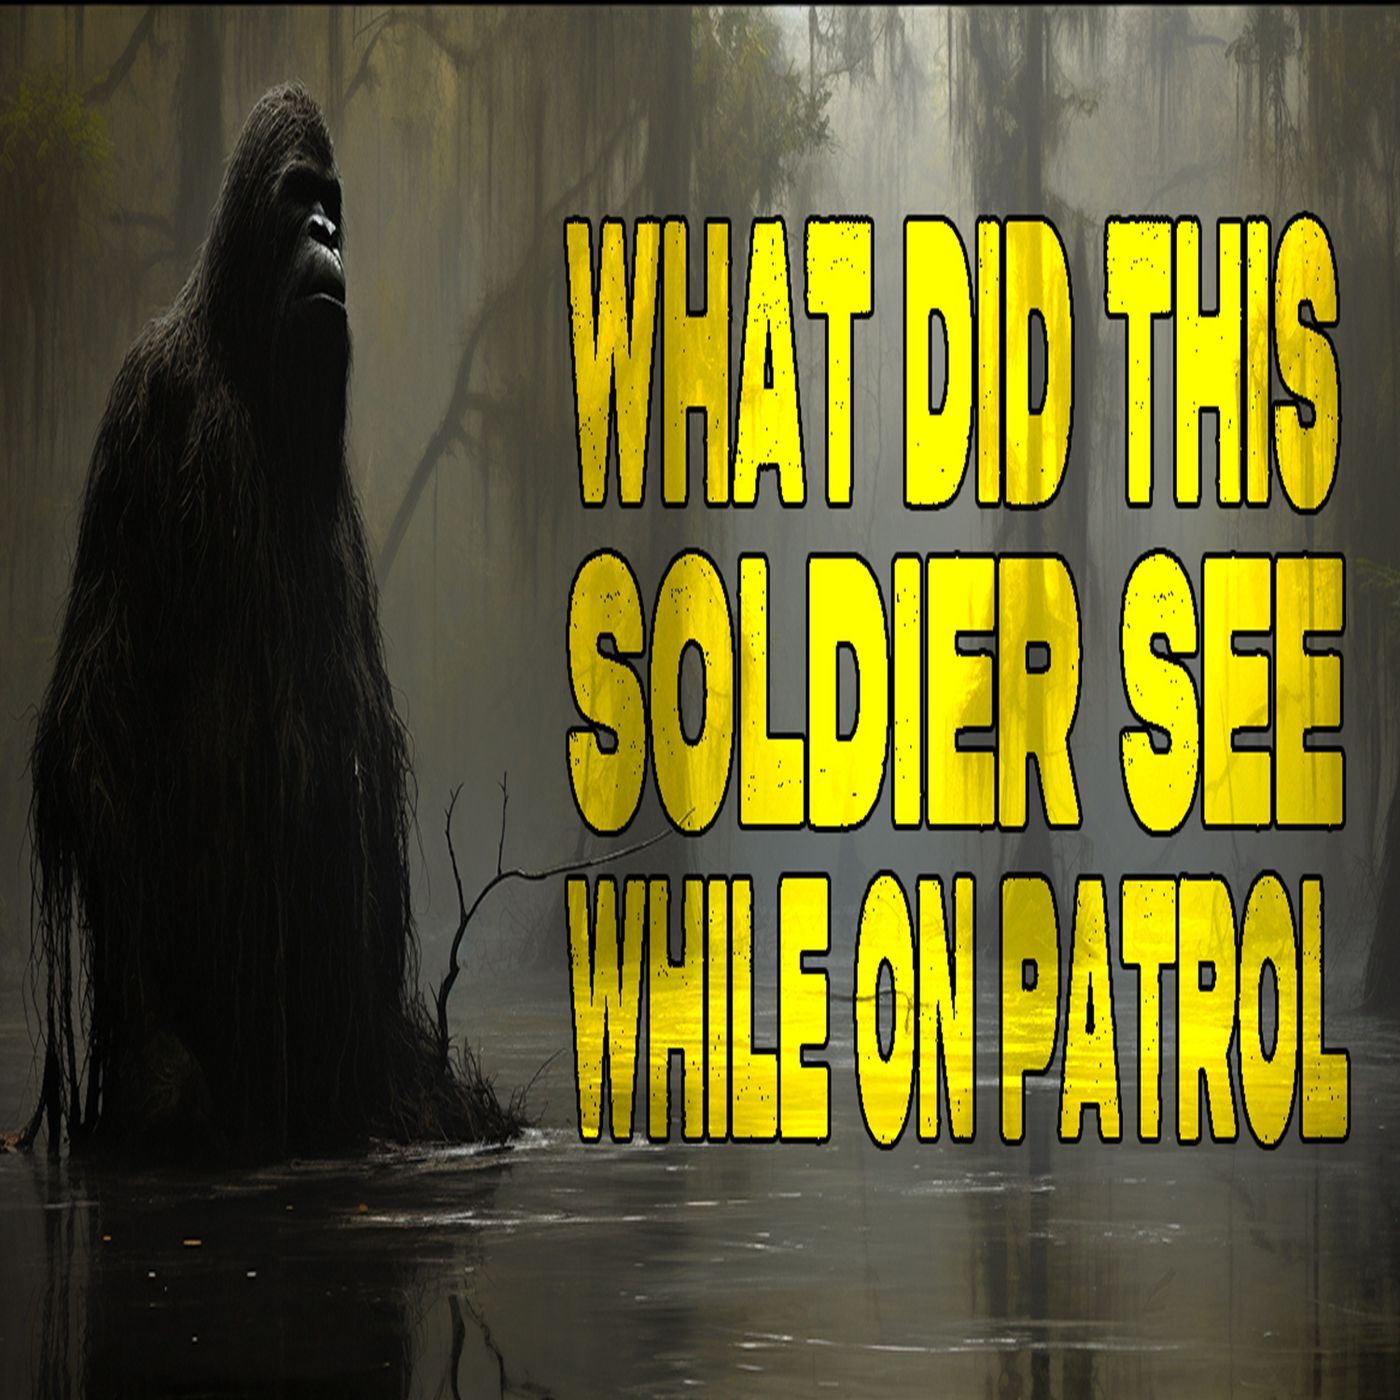 What Creature Did This Soldier See?